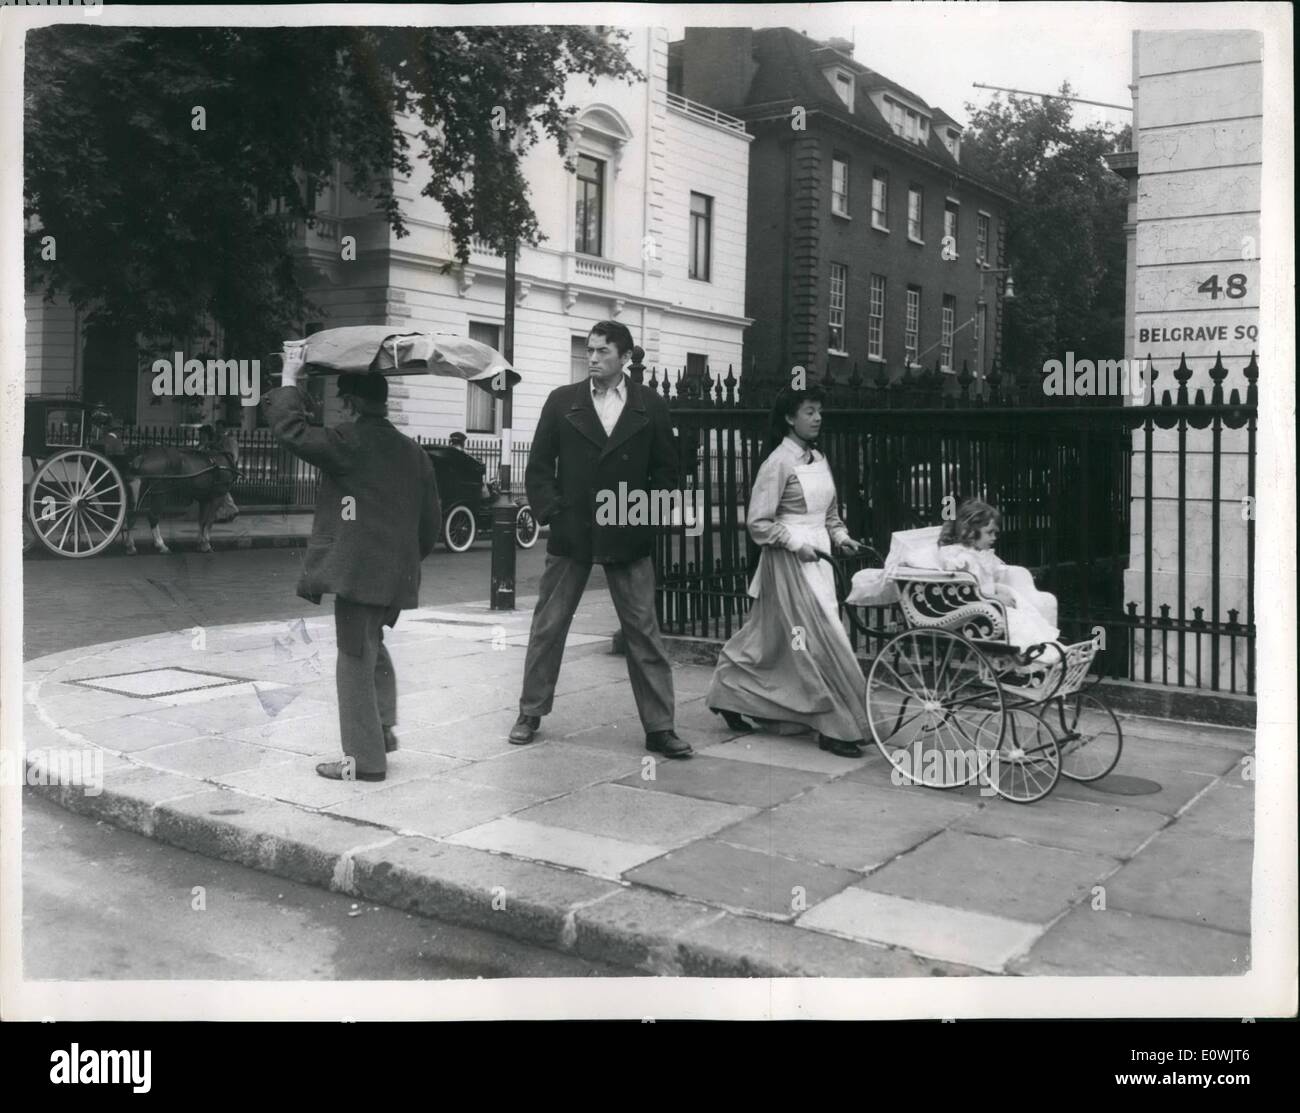 Jun. 06, 1963 - Past Echoes Sunday morning and London's Belgrave Square wakes to the sound of hansom cabs and a pie man. And - yes, your'e right, it's Gregory Peck, they were filming scenes from the new Rank film ''The Million Pound Note.'' Three year old Sheridan Williams sits very demurely in her smart carriage. Stock Photo